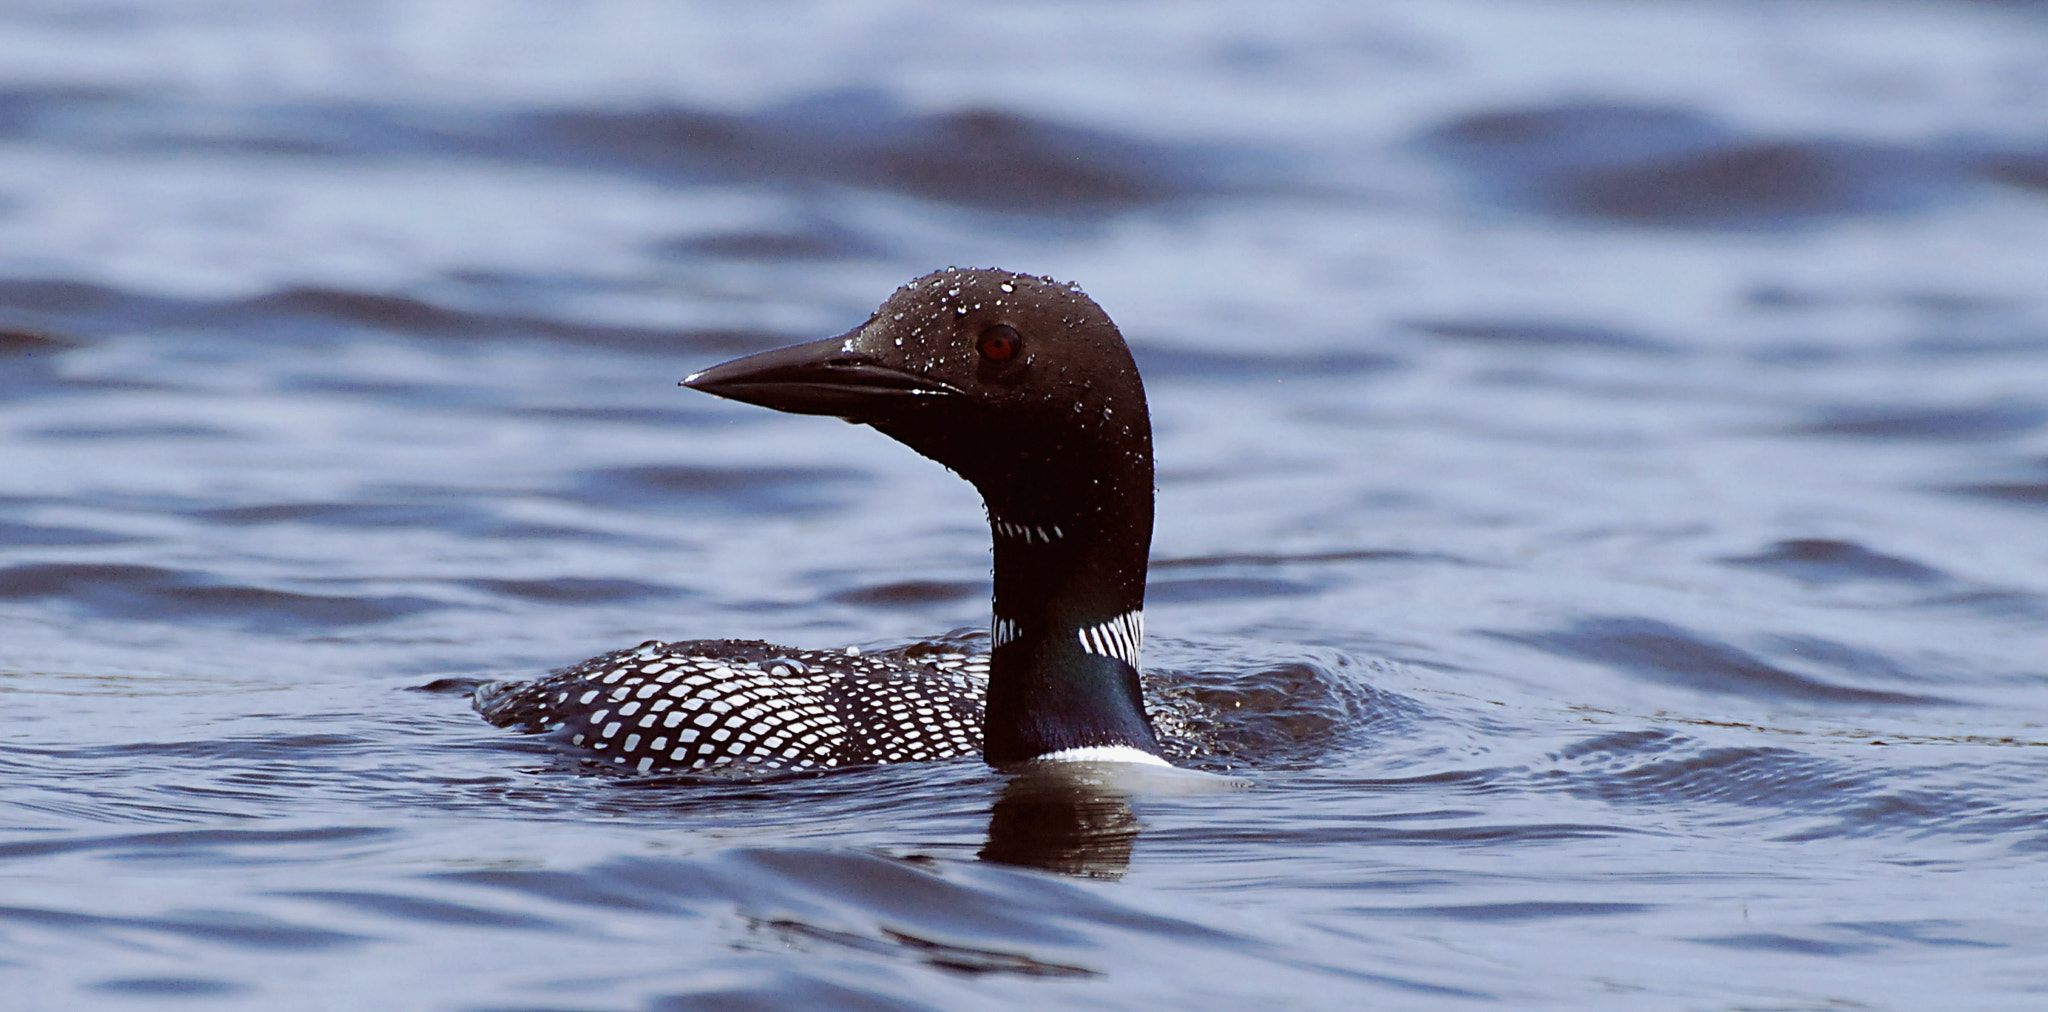 Nikon D80 sample photo. Loon with water droplets and visible eye photography